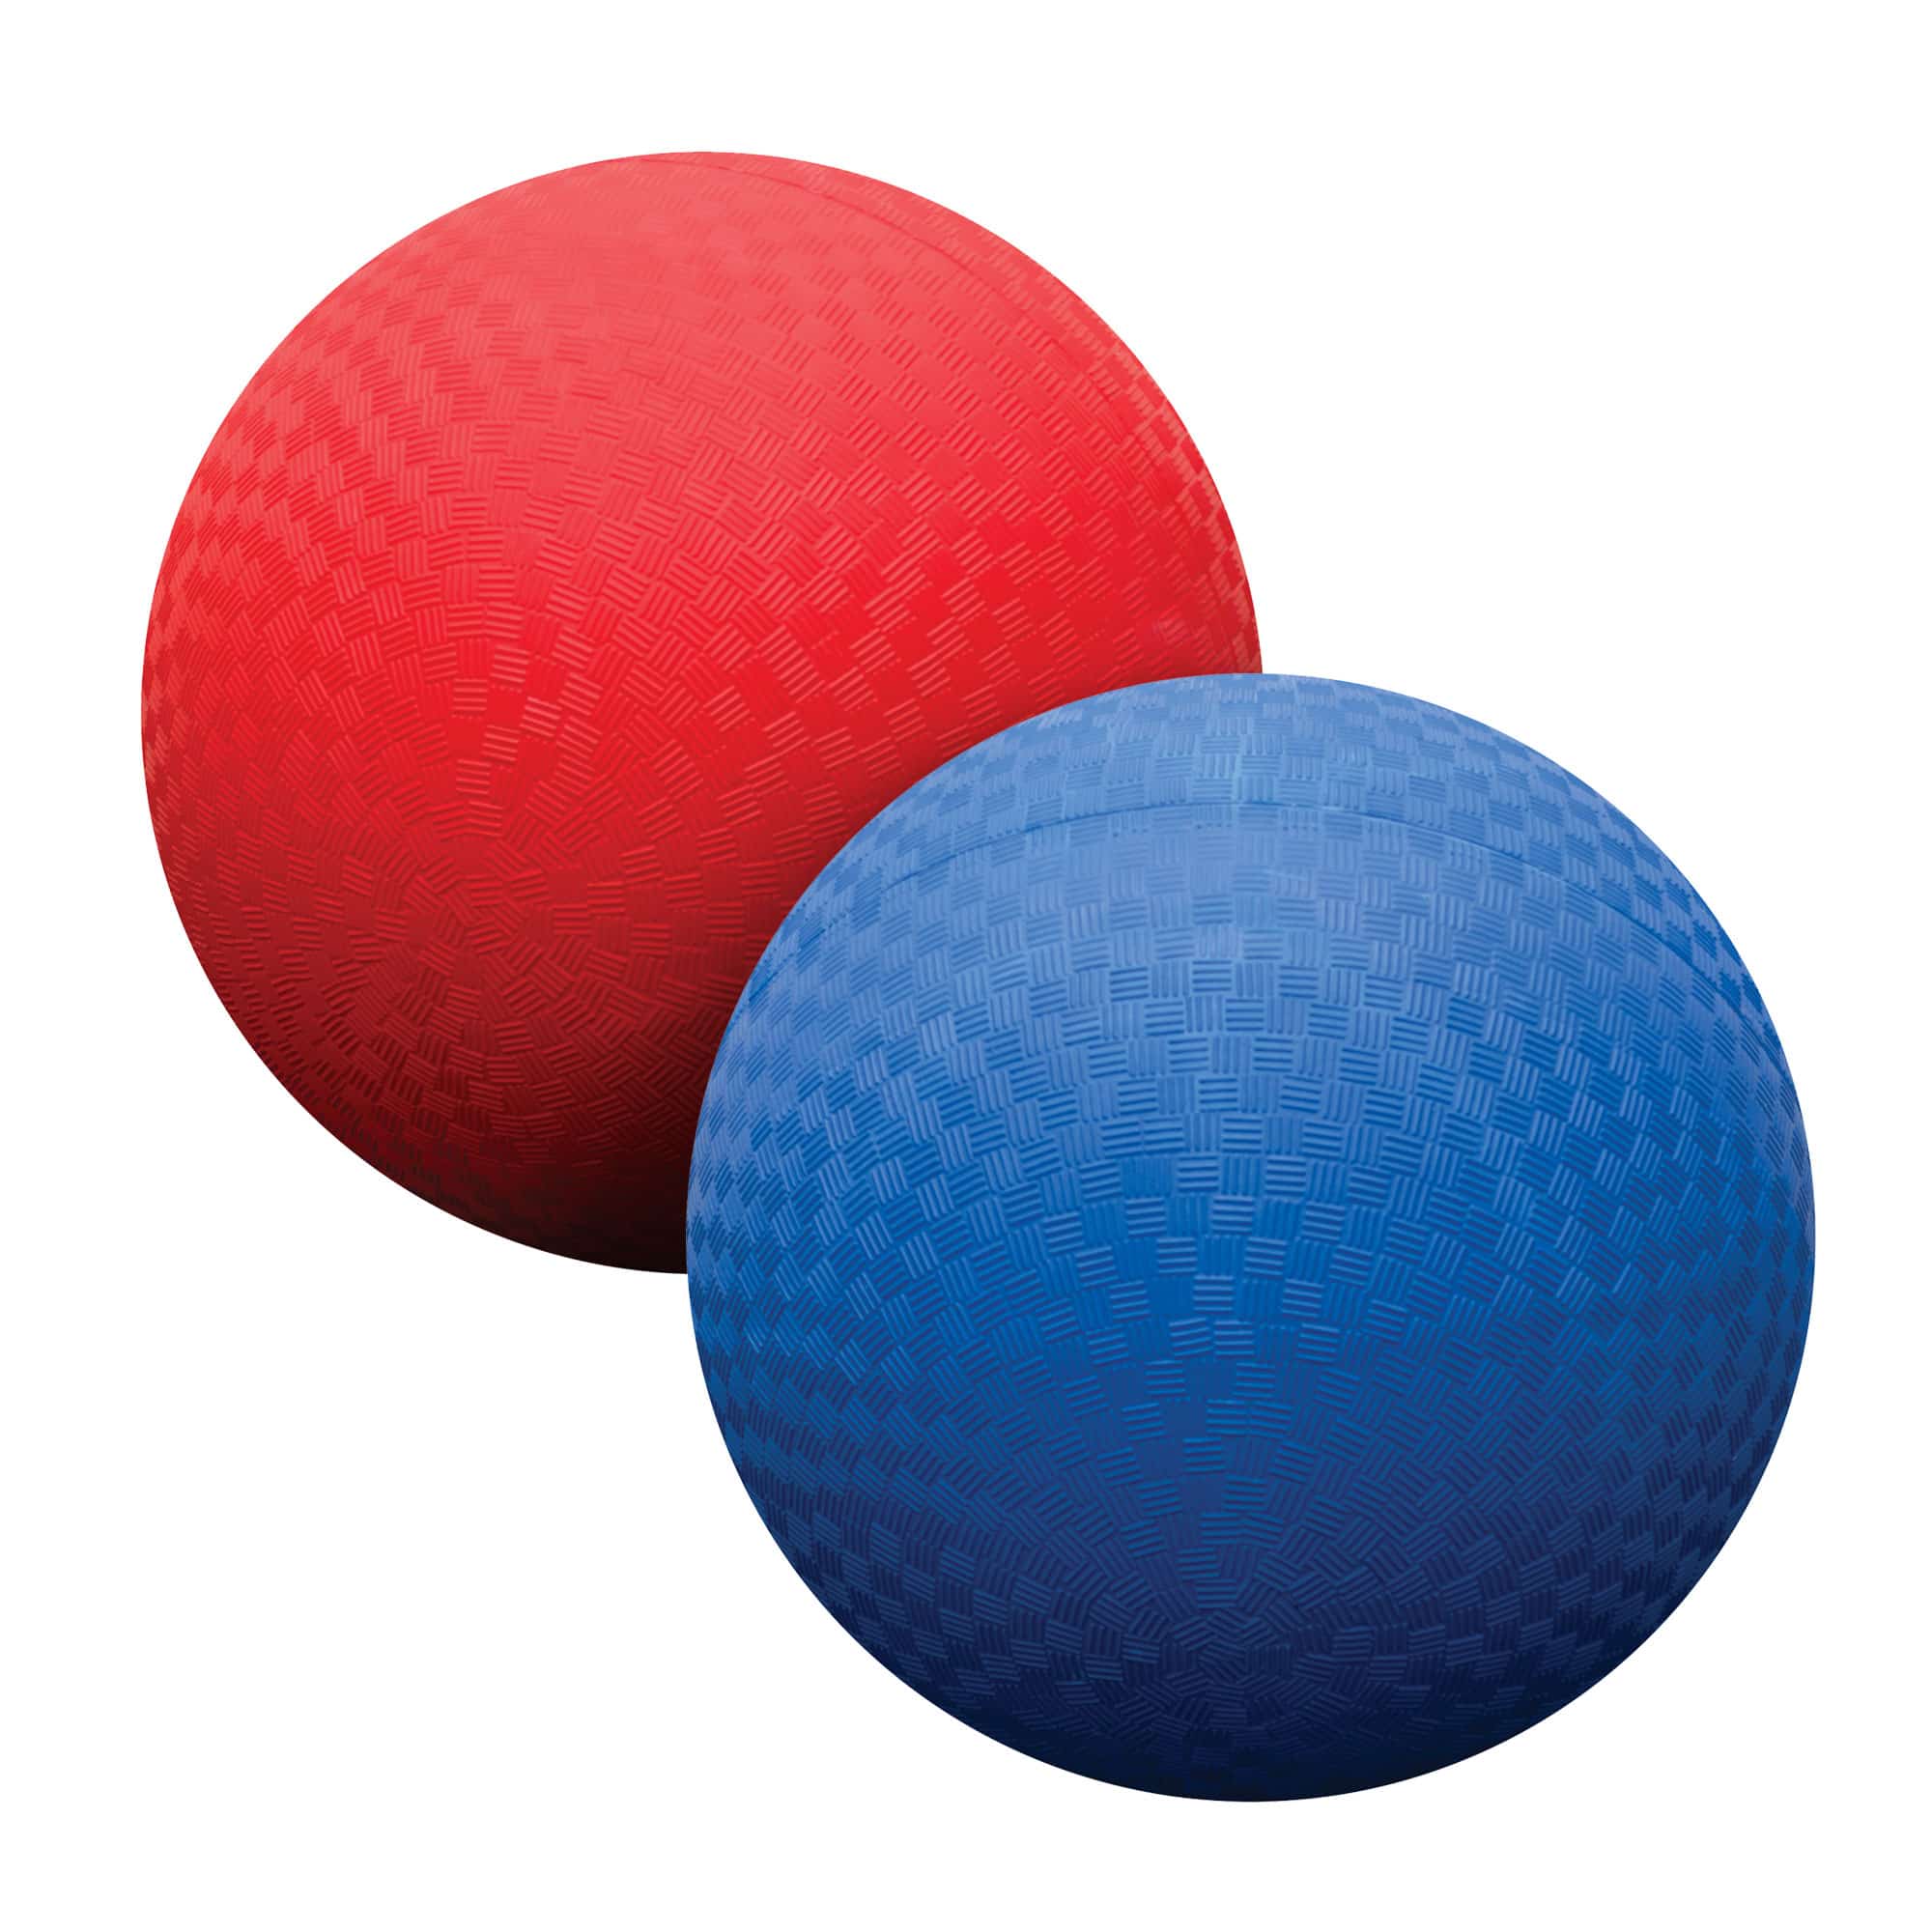 Classic Solid Color Playground Ball